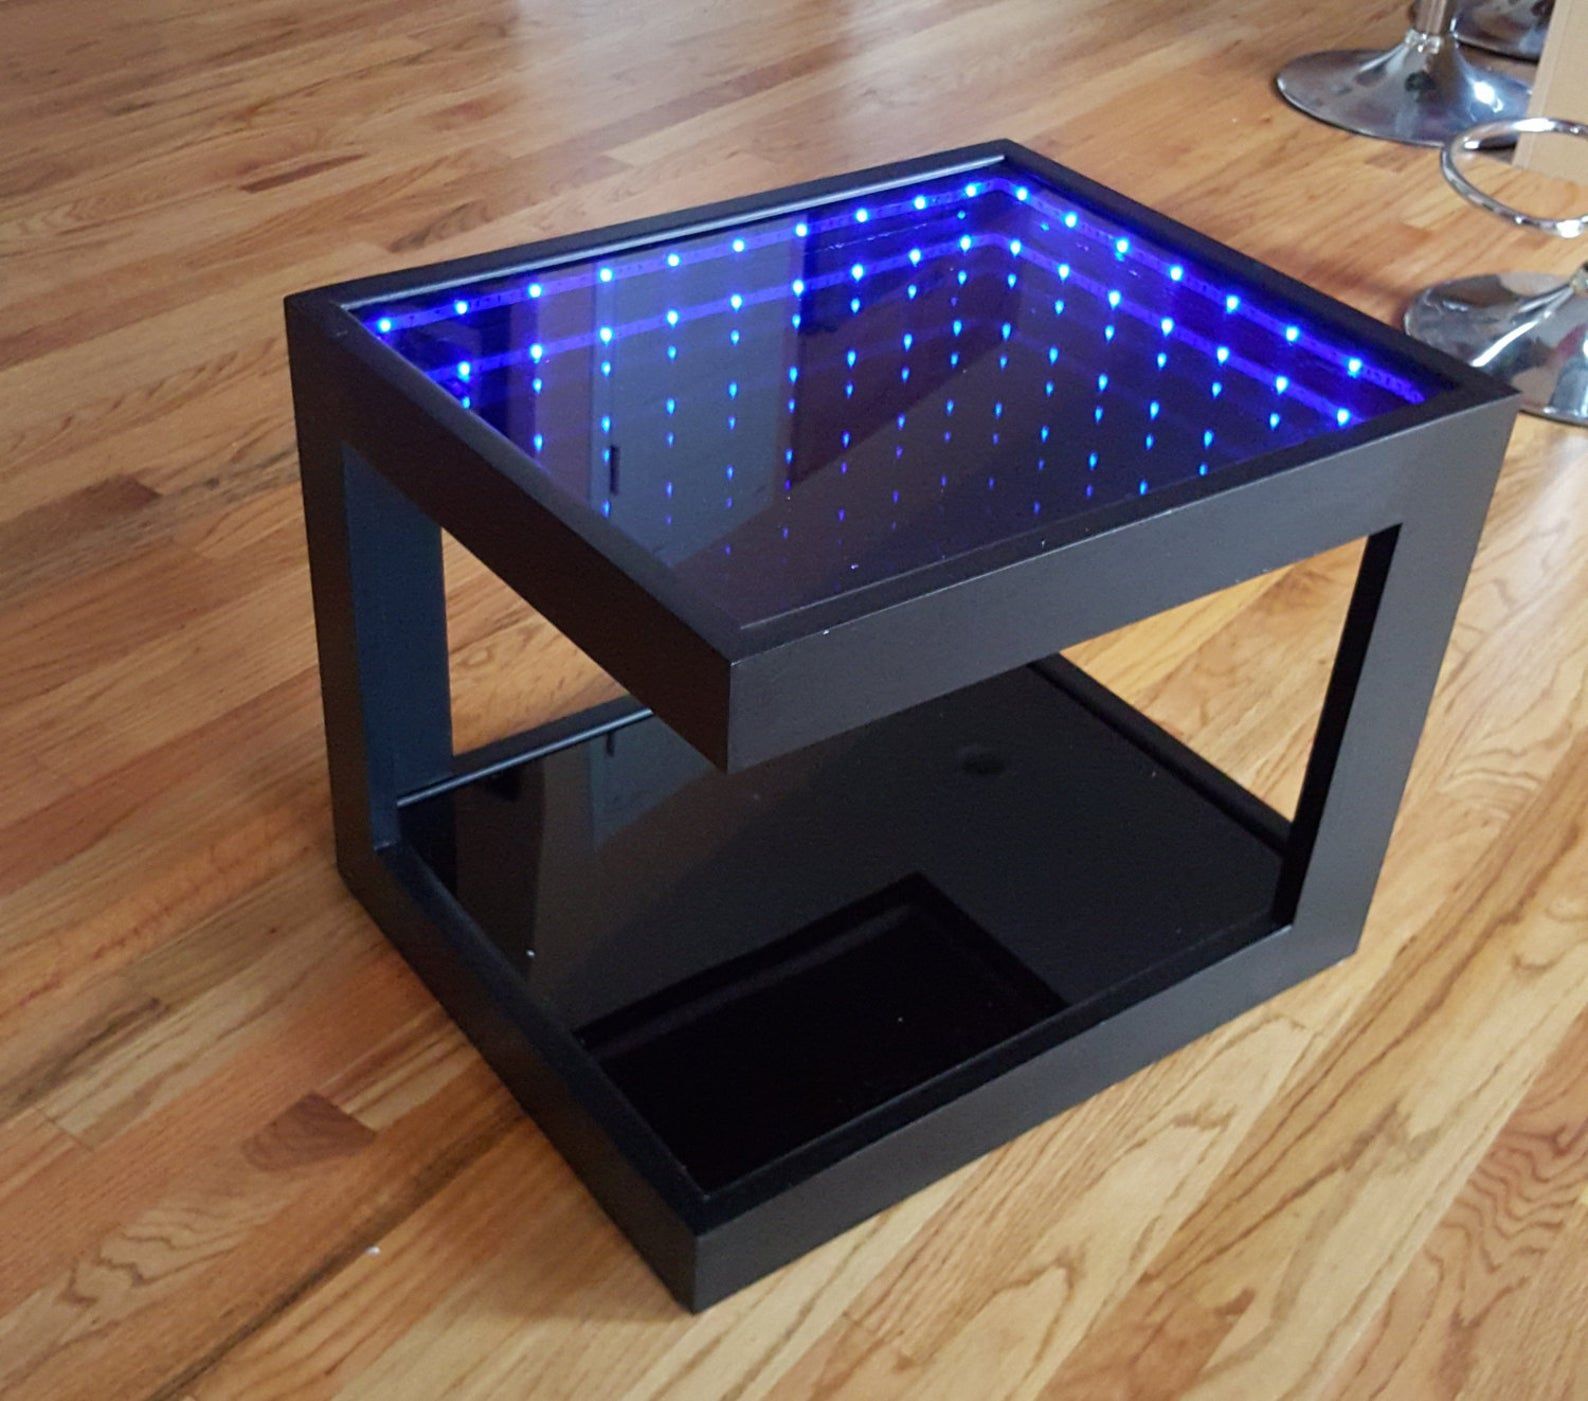 Black Coffee Table With Cool Illusion Lights Featuring | Etsy In 2021 With Coffee Tables With Drawers And Led Lights (View 18 of 20)